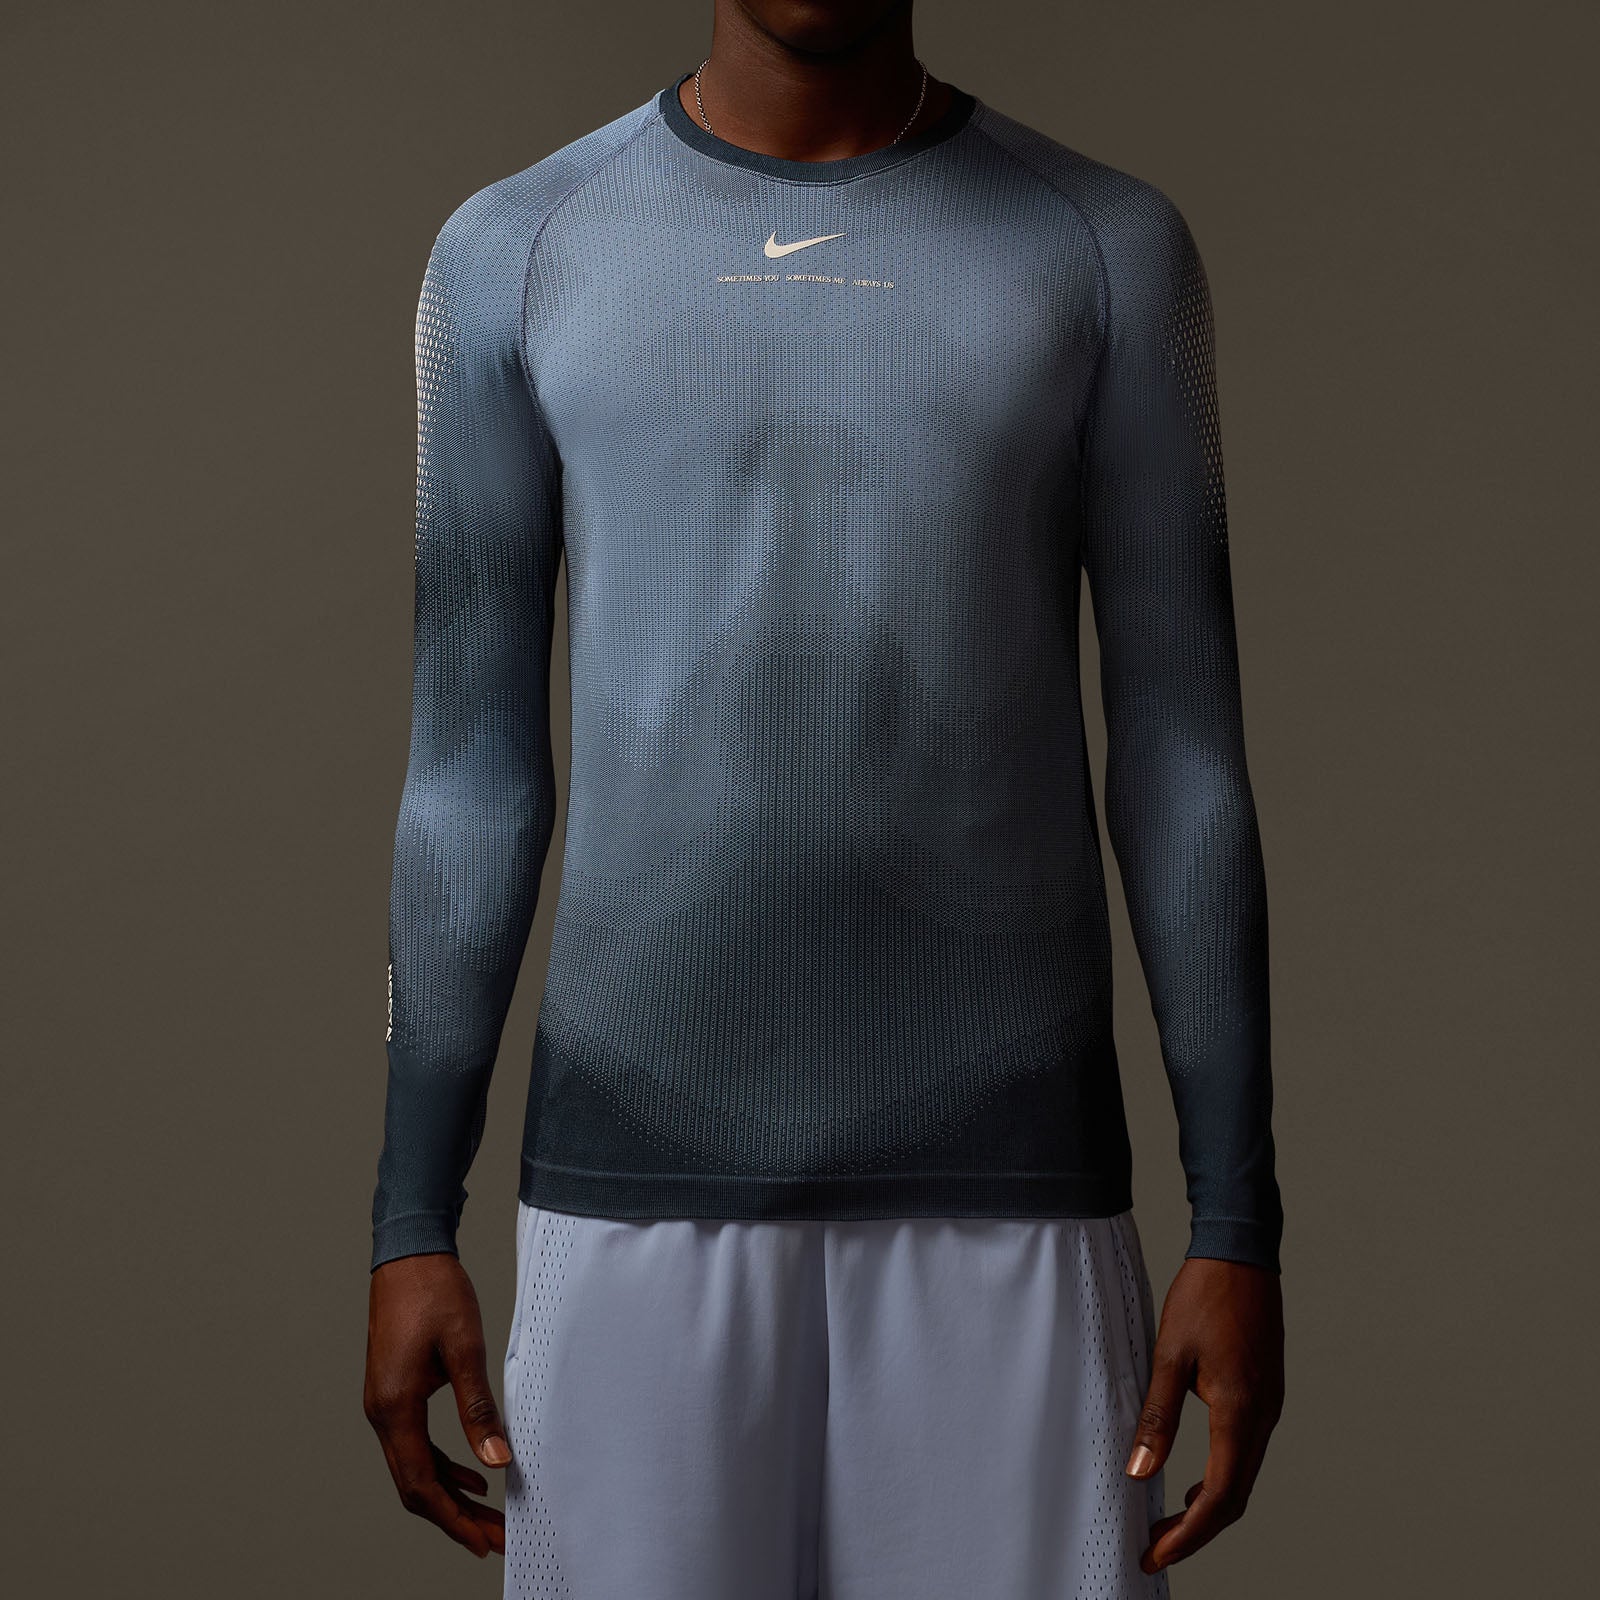 LS ENGINEERED KNIT BASE LAYER TOP - IMAGE 6